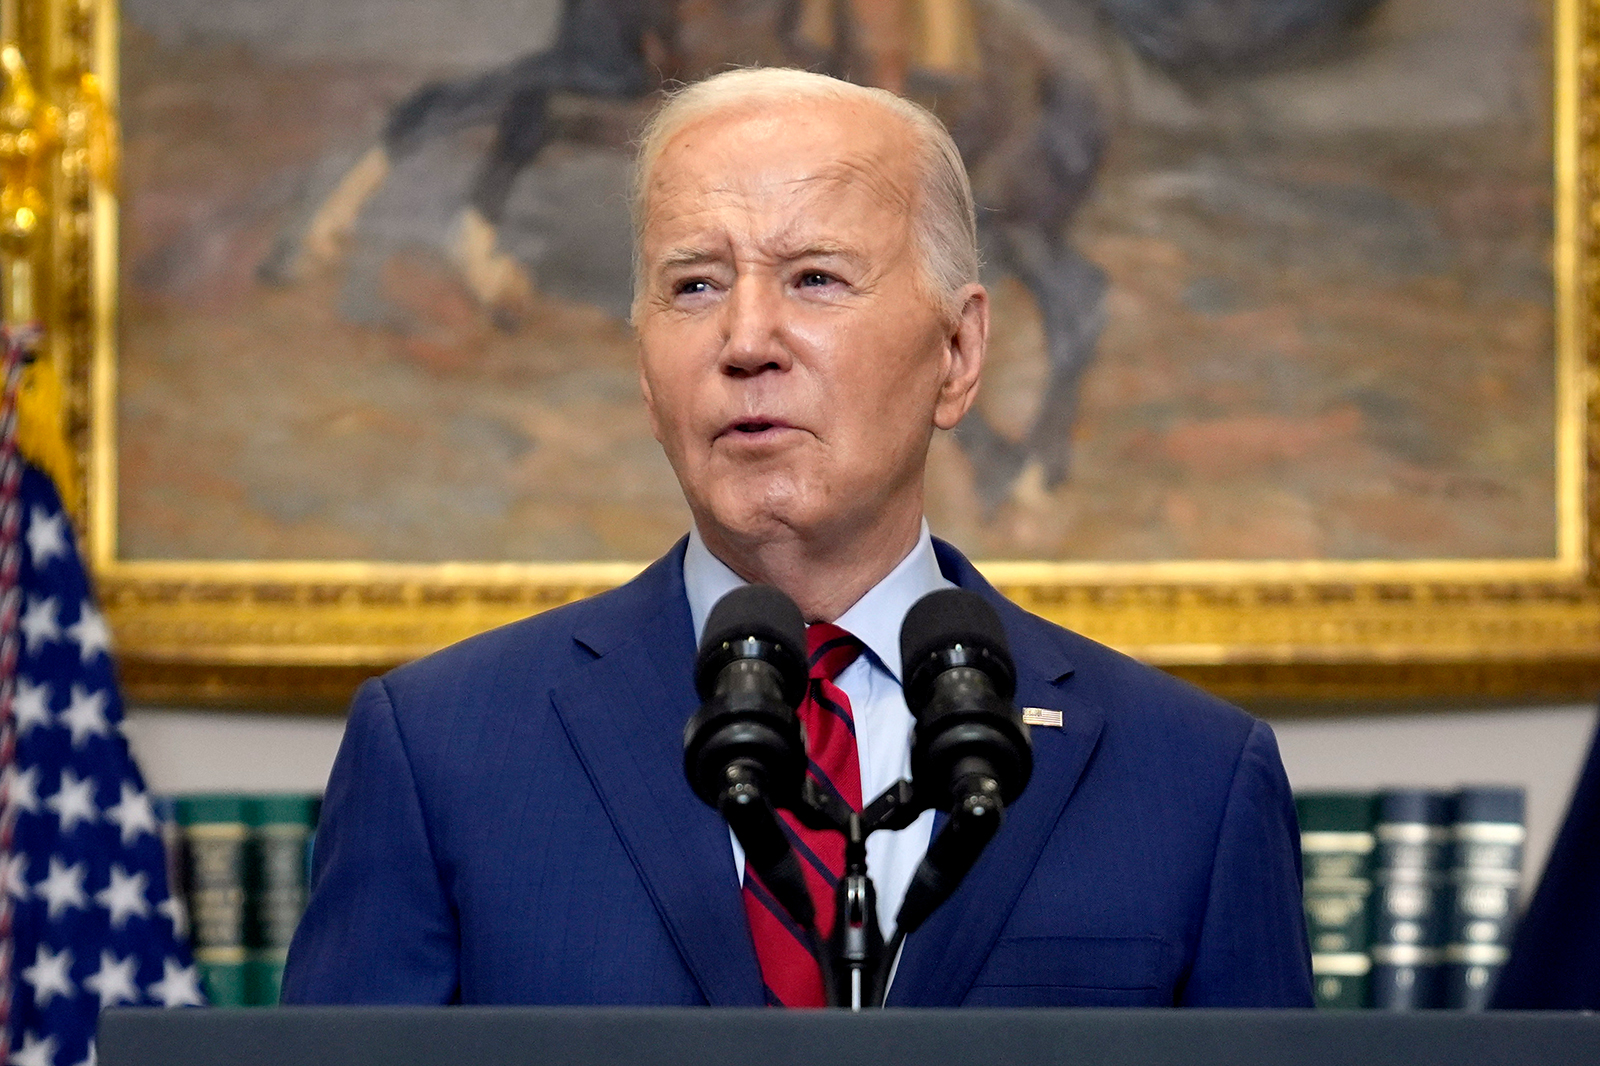 Joe Biden delivers remarks about student protests over the war in Gaza, from the Roosevelt Room of the White House, on May 2, in Washington.